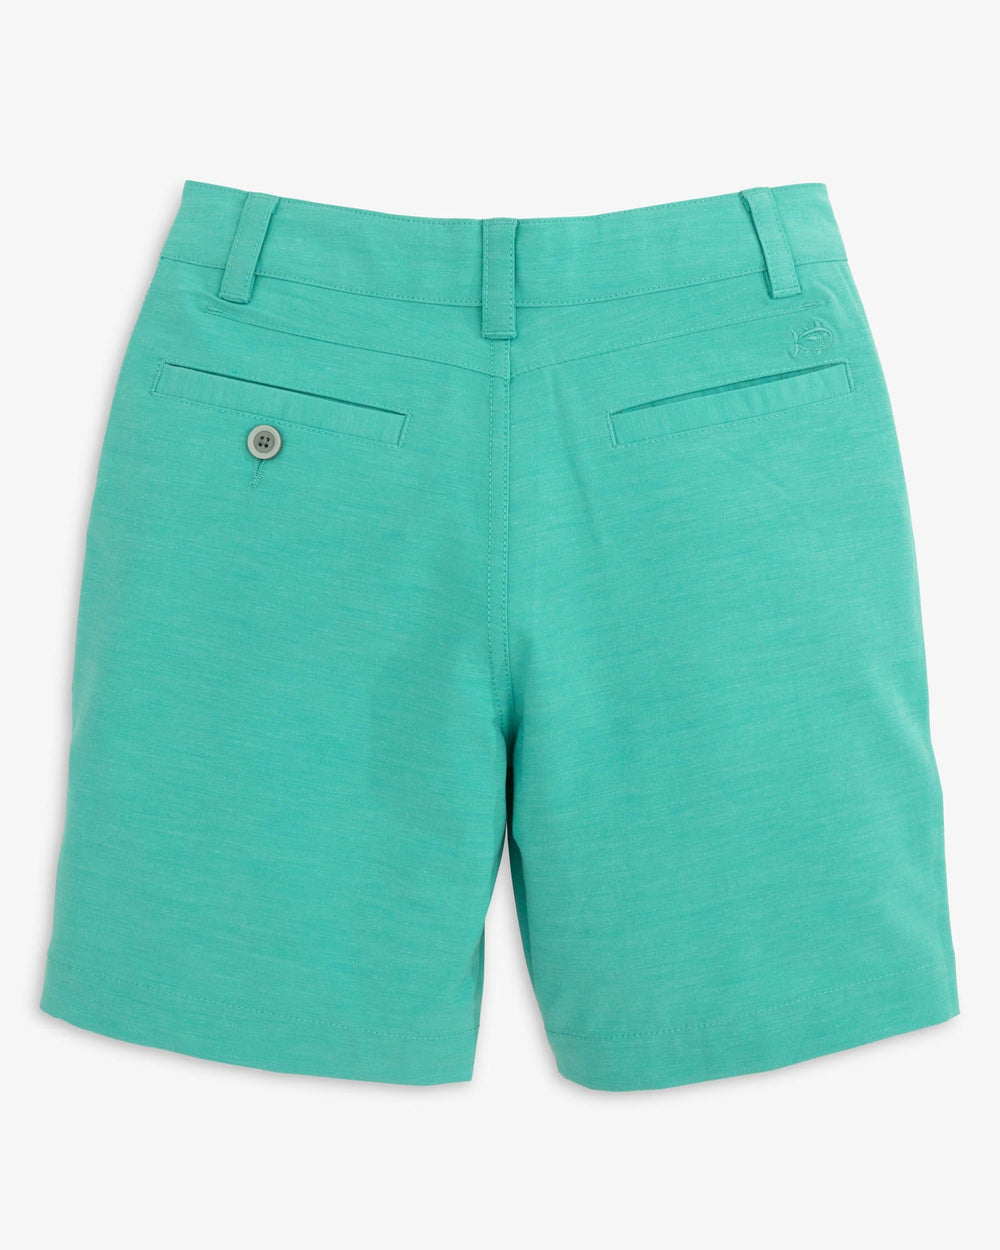 The back view of the Southern Tide Boys Heathered T3 Gulf Short by Southern Tide - Heather Tidal Wave